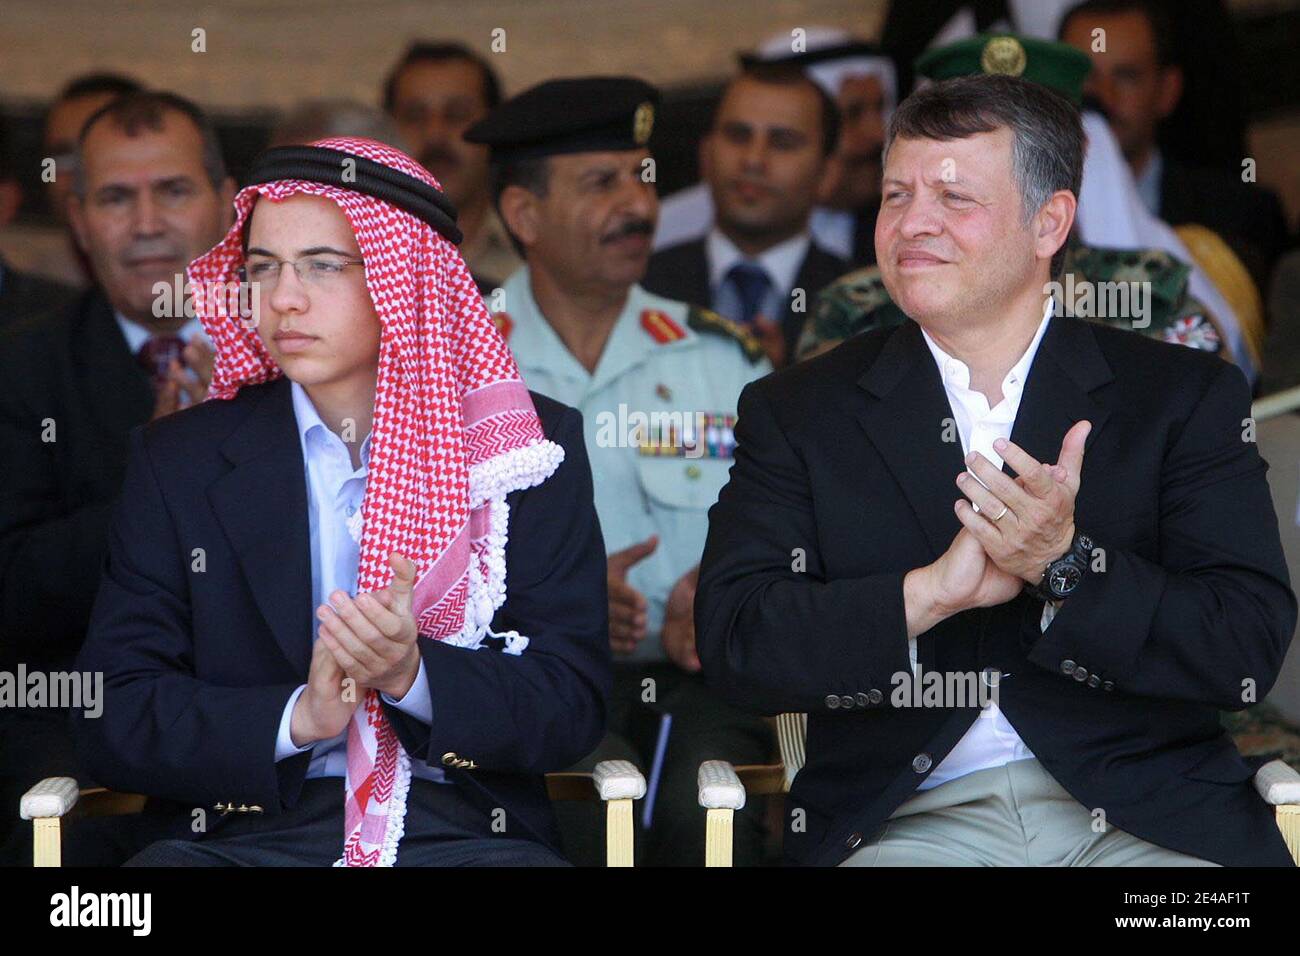 Jordan's King Abdullah joins his eldest son Hussein, 15-years old, in his  first public duty as Crown Prince, to meet with bedouin tribes of Bani  Hassan in the area of Mafraq, east